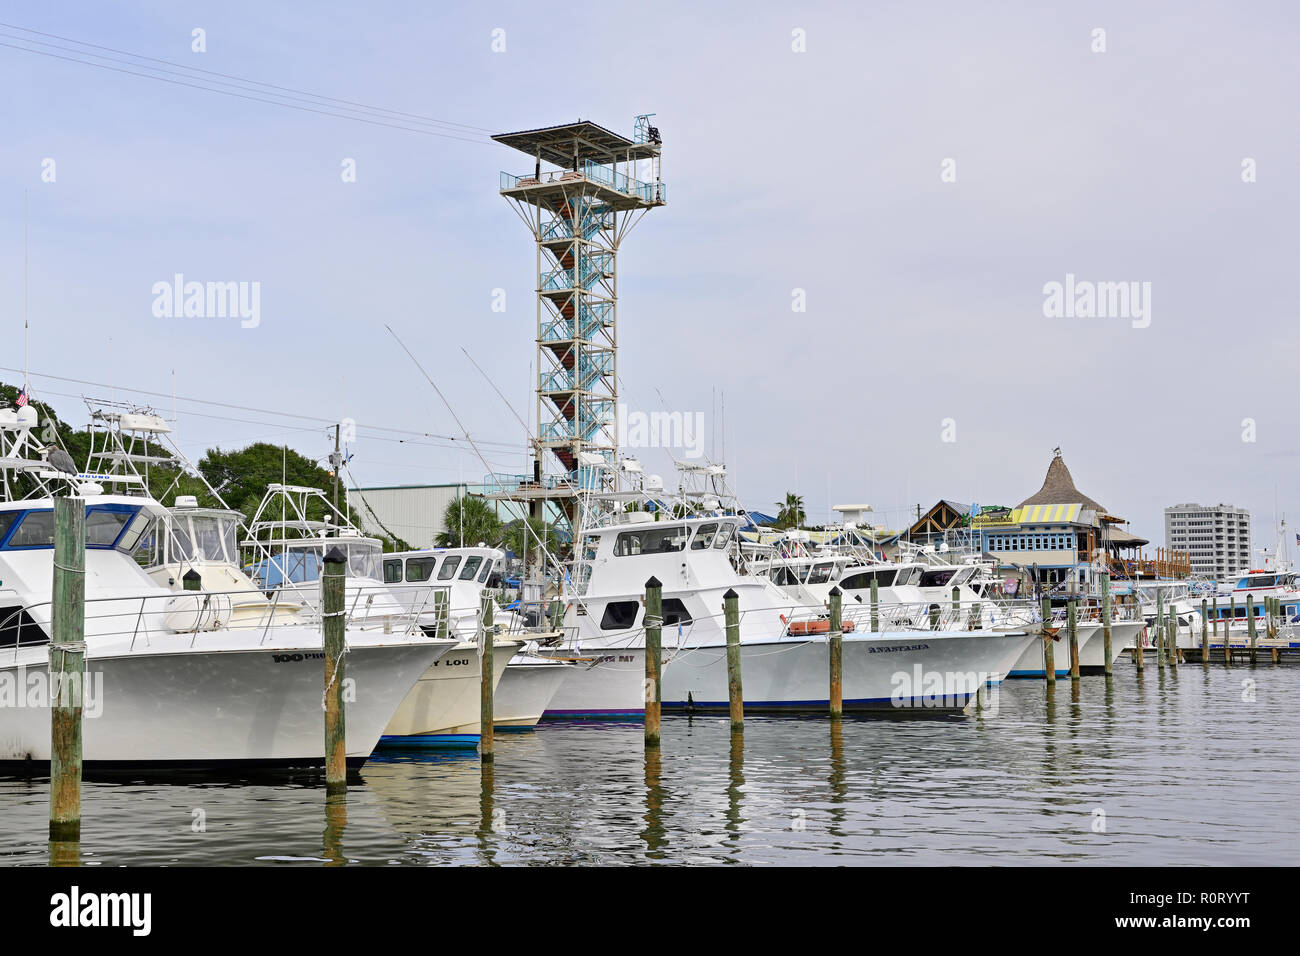 Part of the Destin commercial charter fishing fleet or boats along the Gulf coast in the Florida panhandle at Harbor Walk Marina, Destin Florida USA. Stock Photo